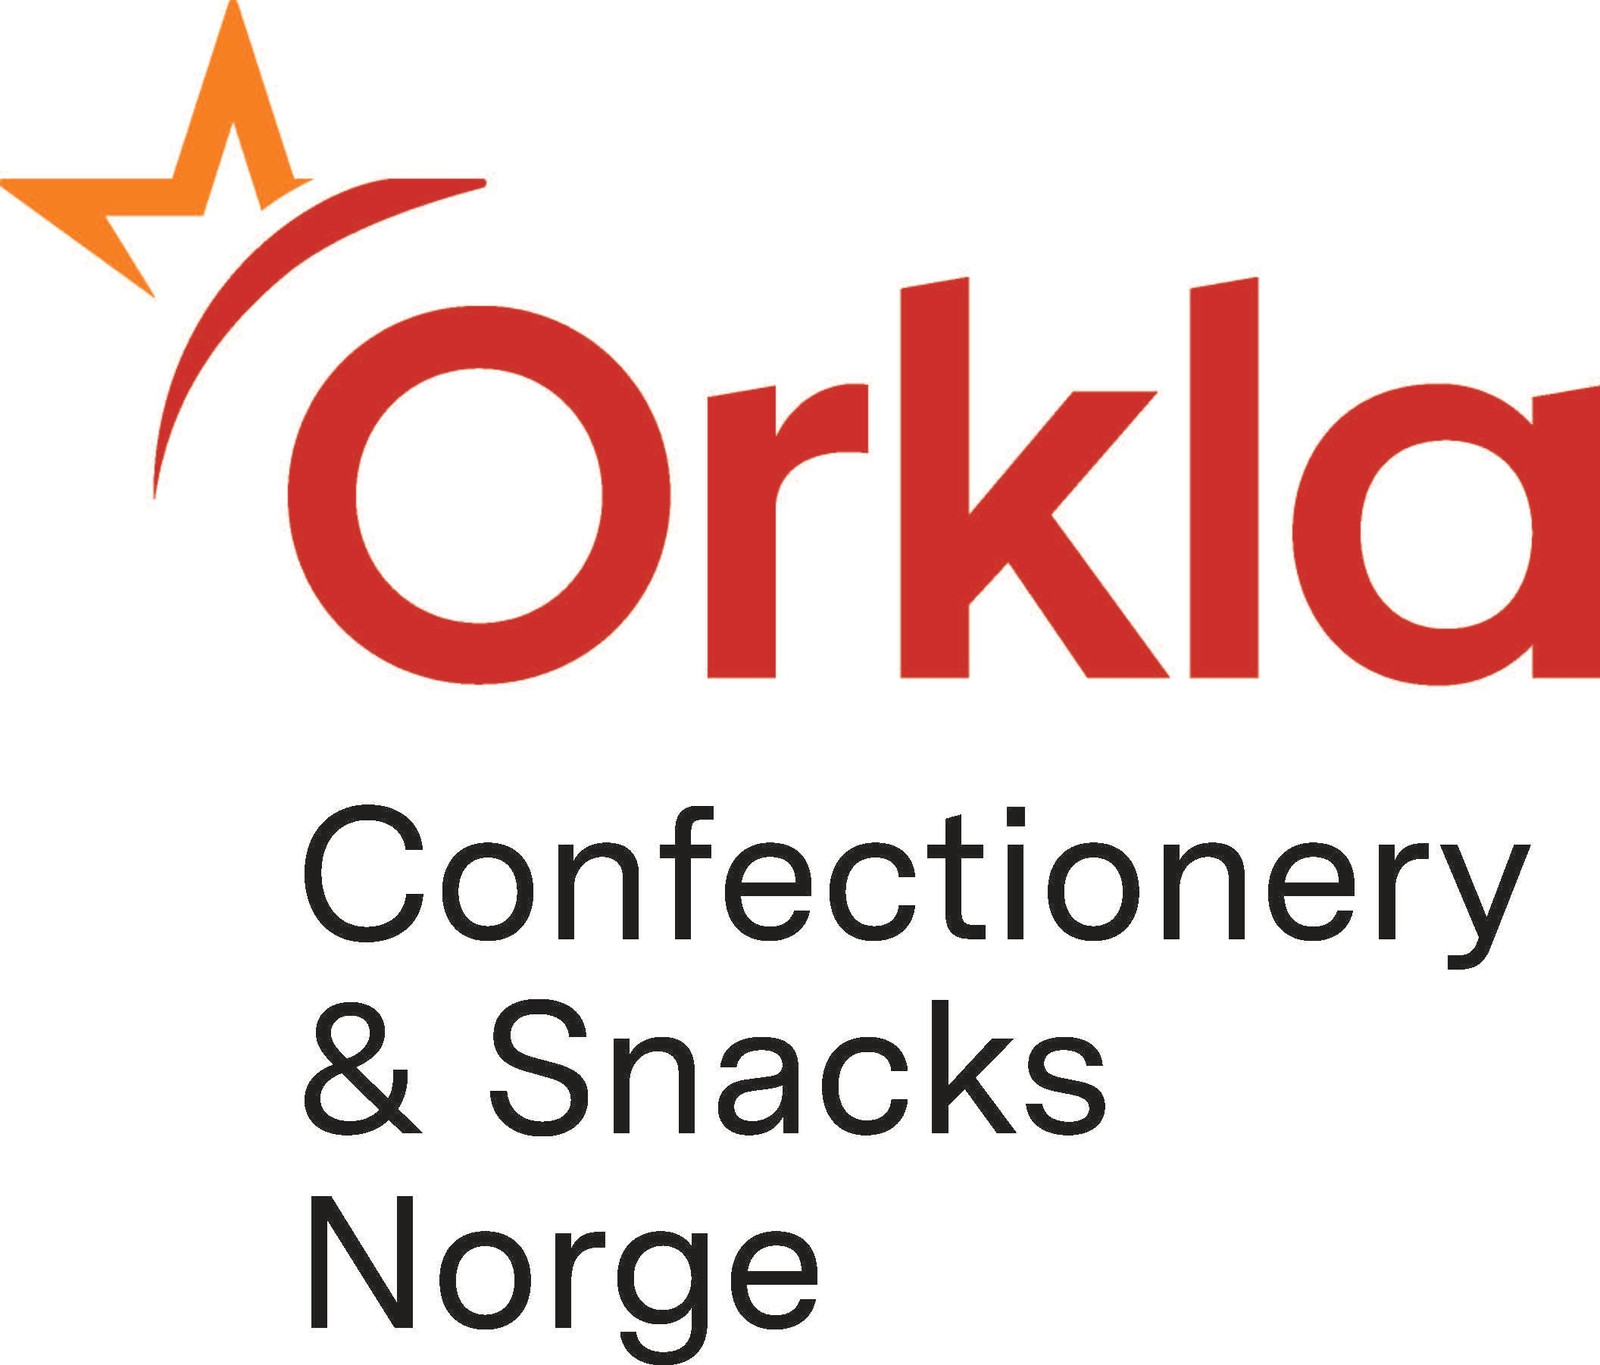 Orkla Confectionery & Snacks Norge AS